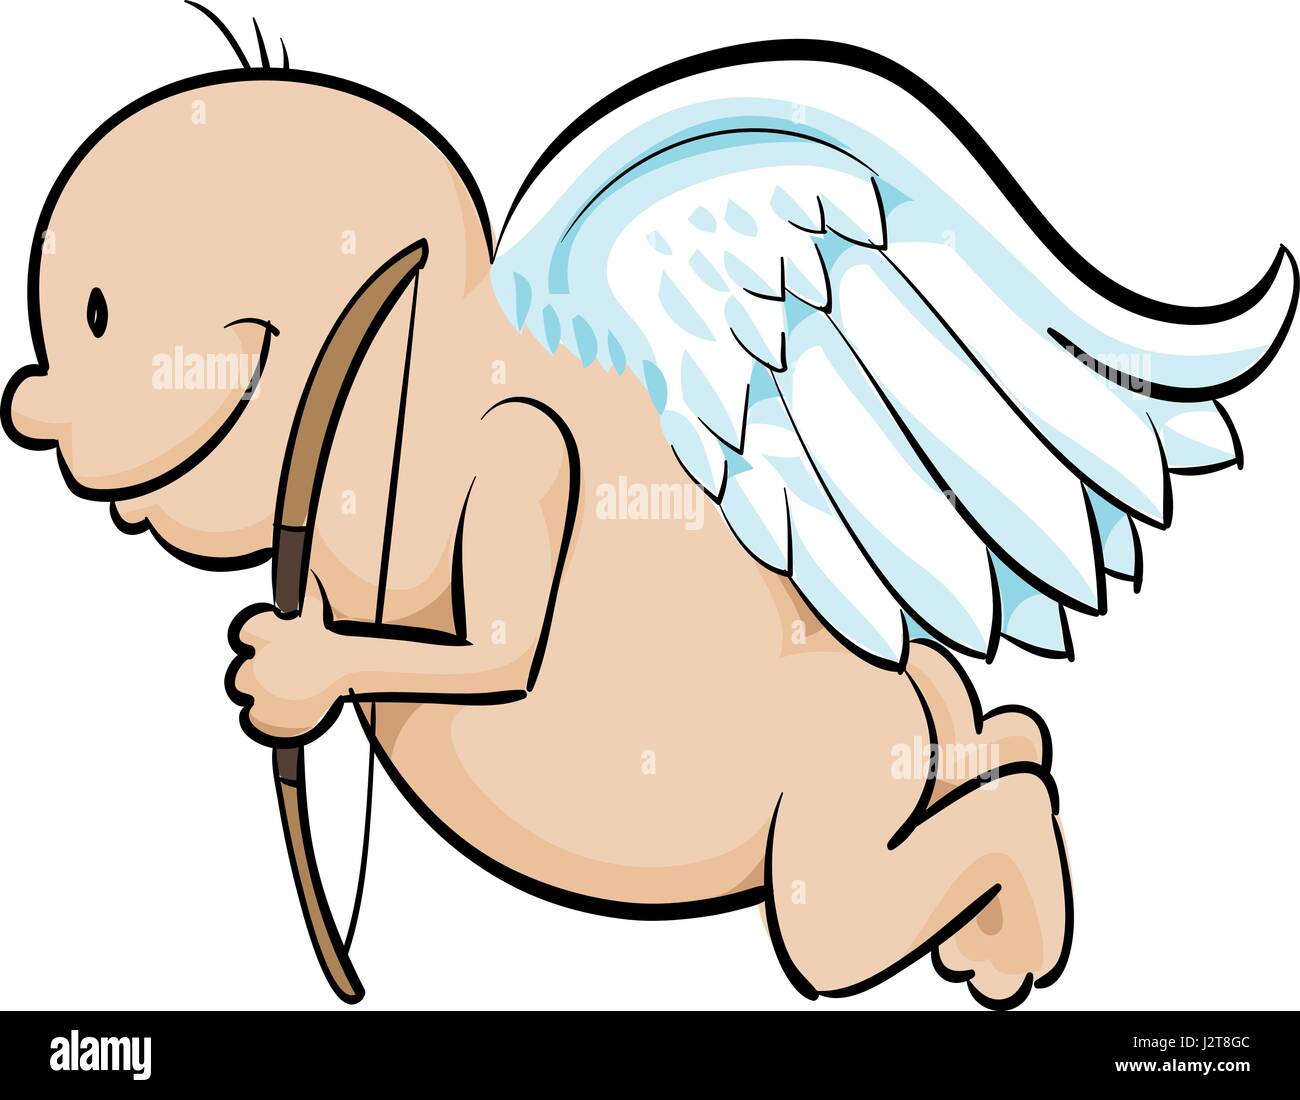 Cute cartoon Cupid with wings and bow. Stock Vector